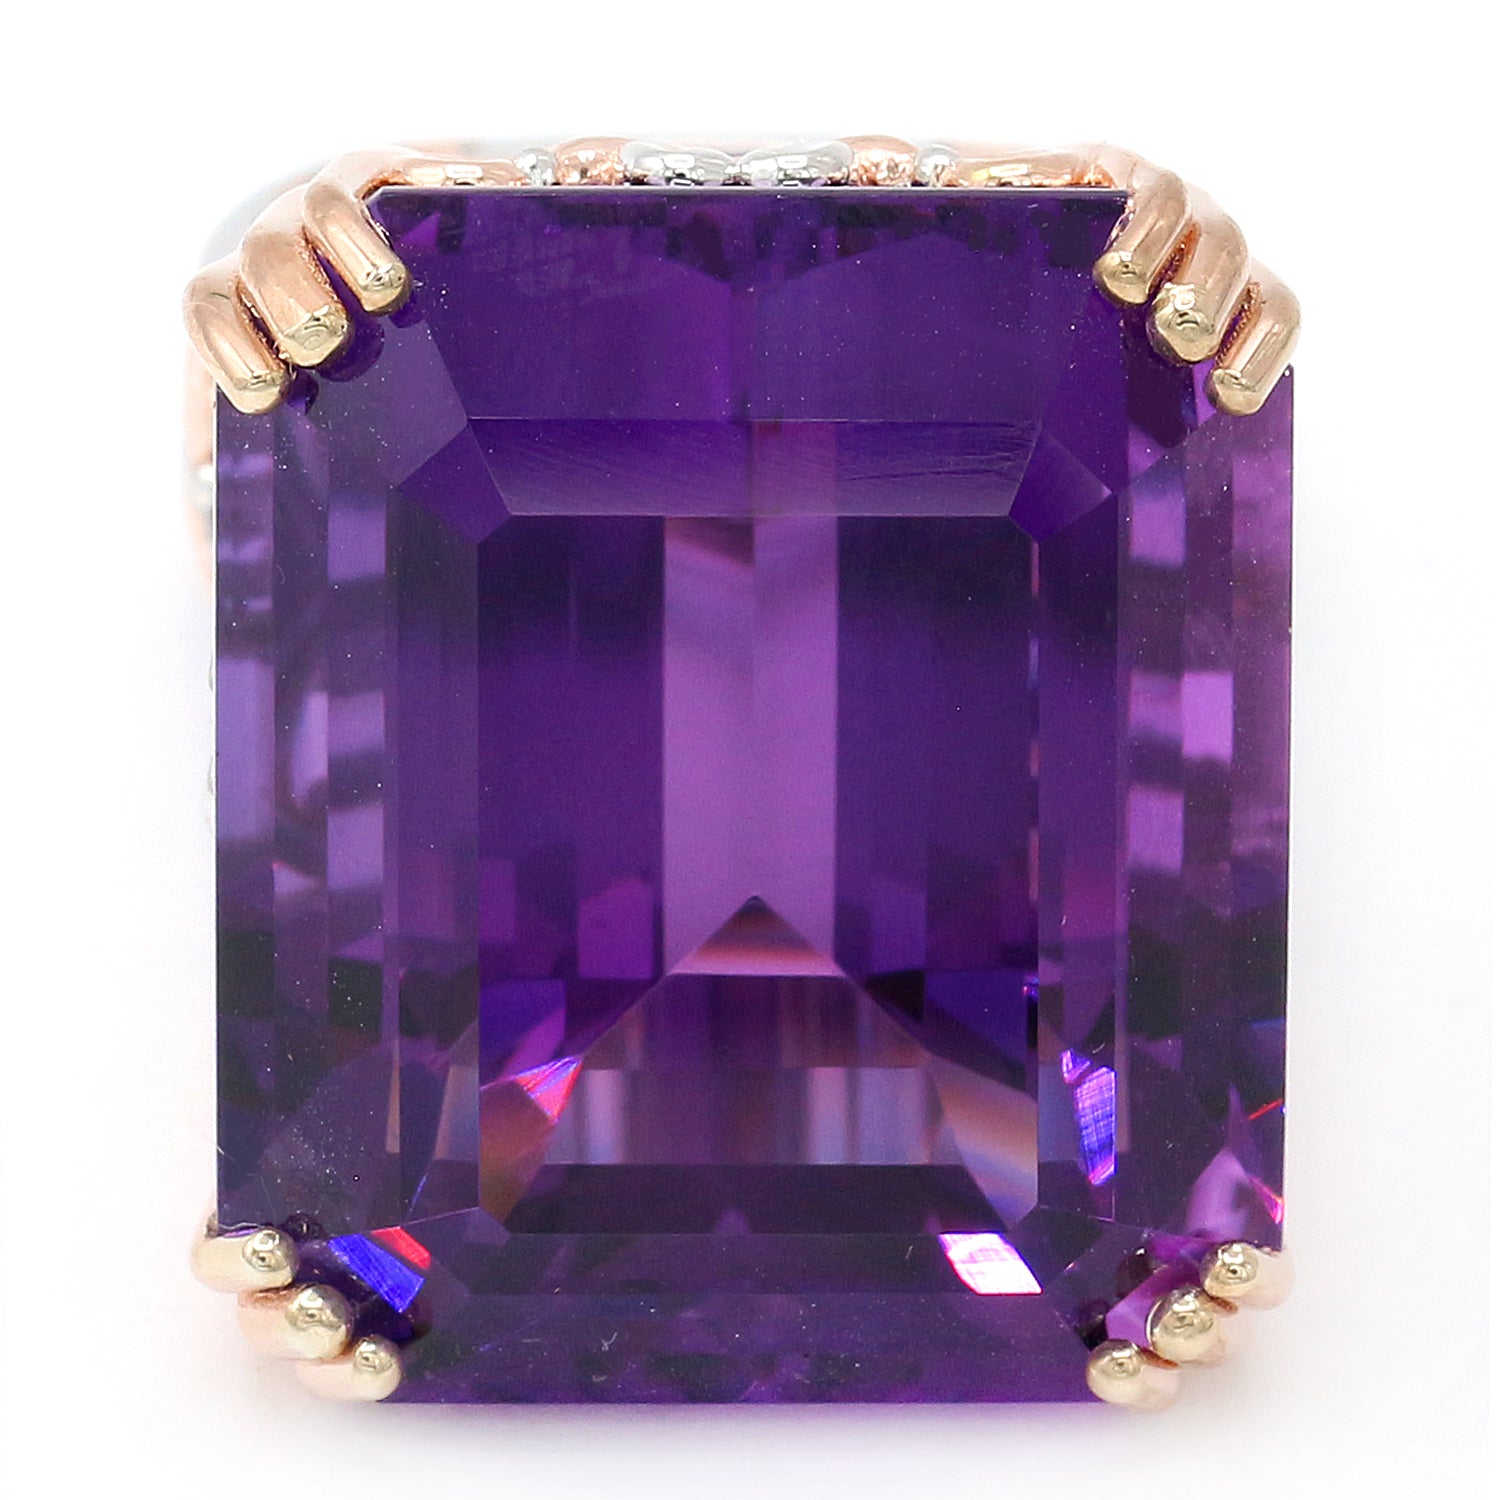 Limited Edition Gems en Vogue One-of-a-Kind 67.97ctw Namibian Amethyst & White Zircon Honker Ring